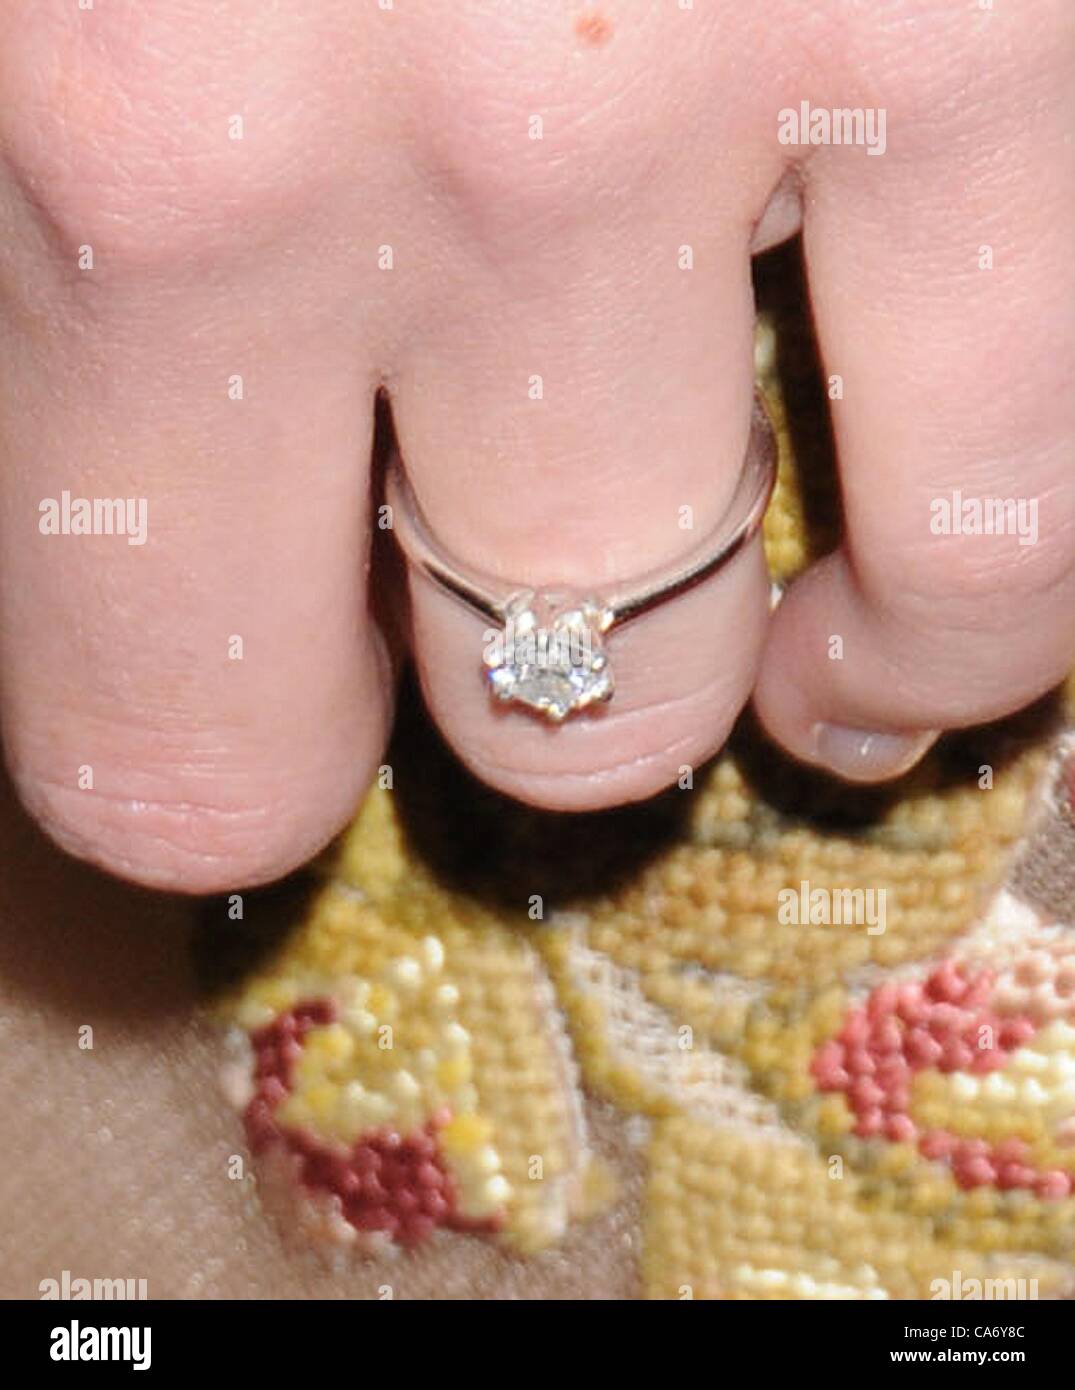 The Best & Worst Celebrity Engagement Rings In Hollywood